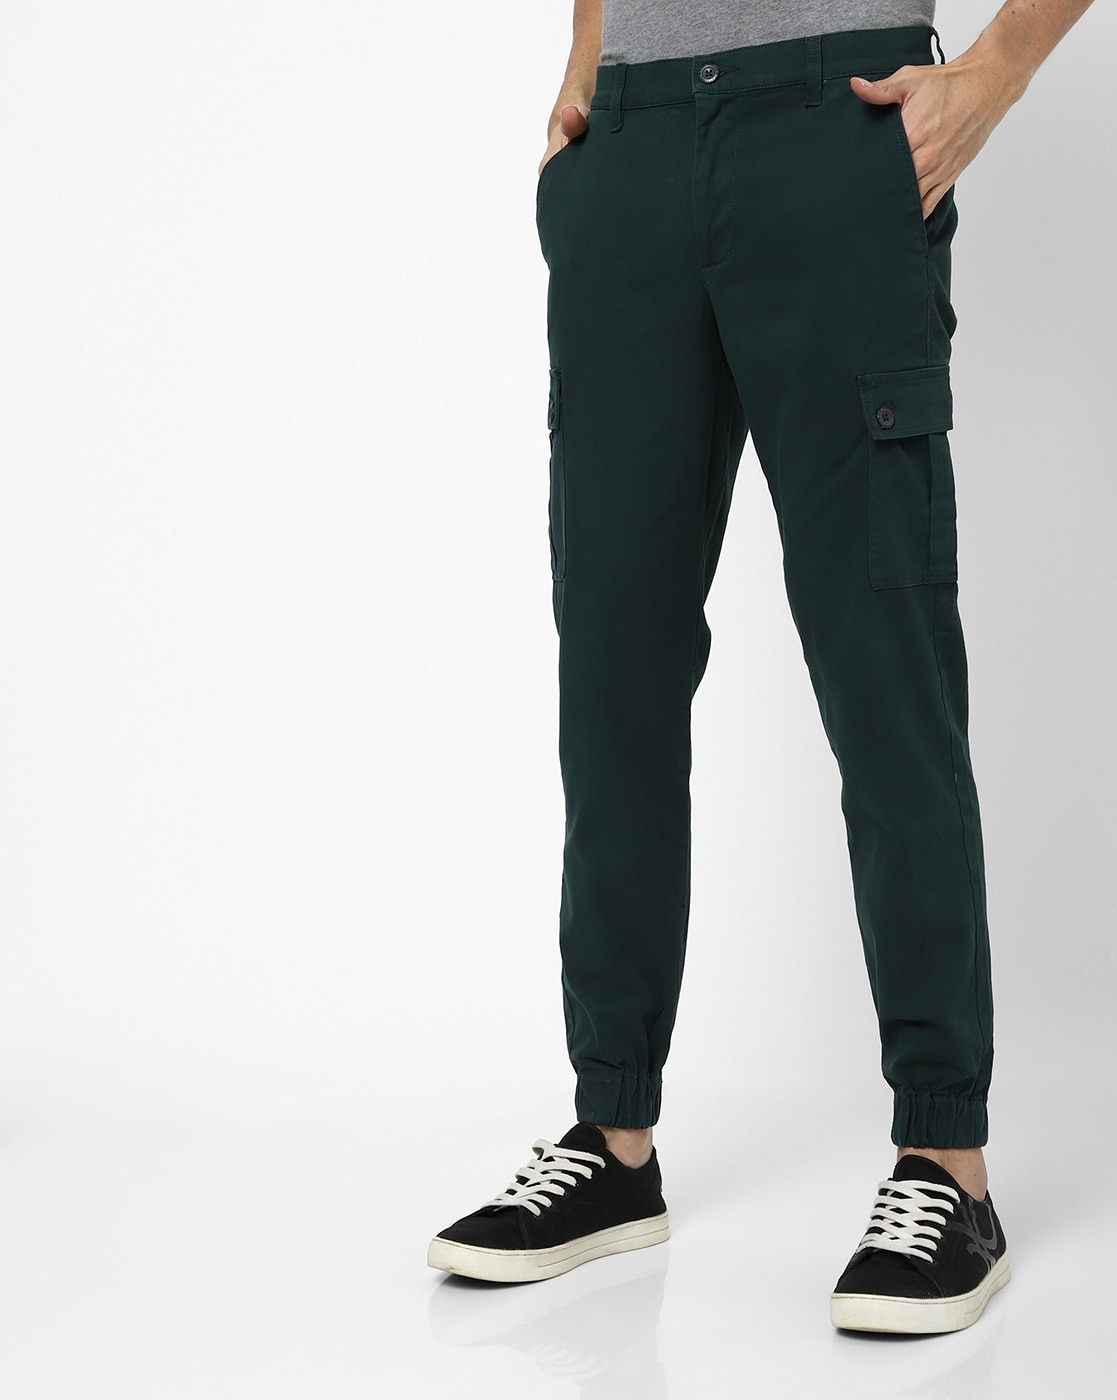 Buy The Indian Garage Co Men Olive Green Solid Chinos Trousers  Trousers  for Men 19674534  Myntra